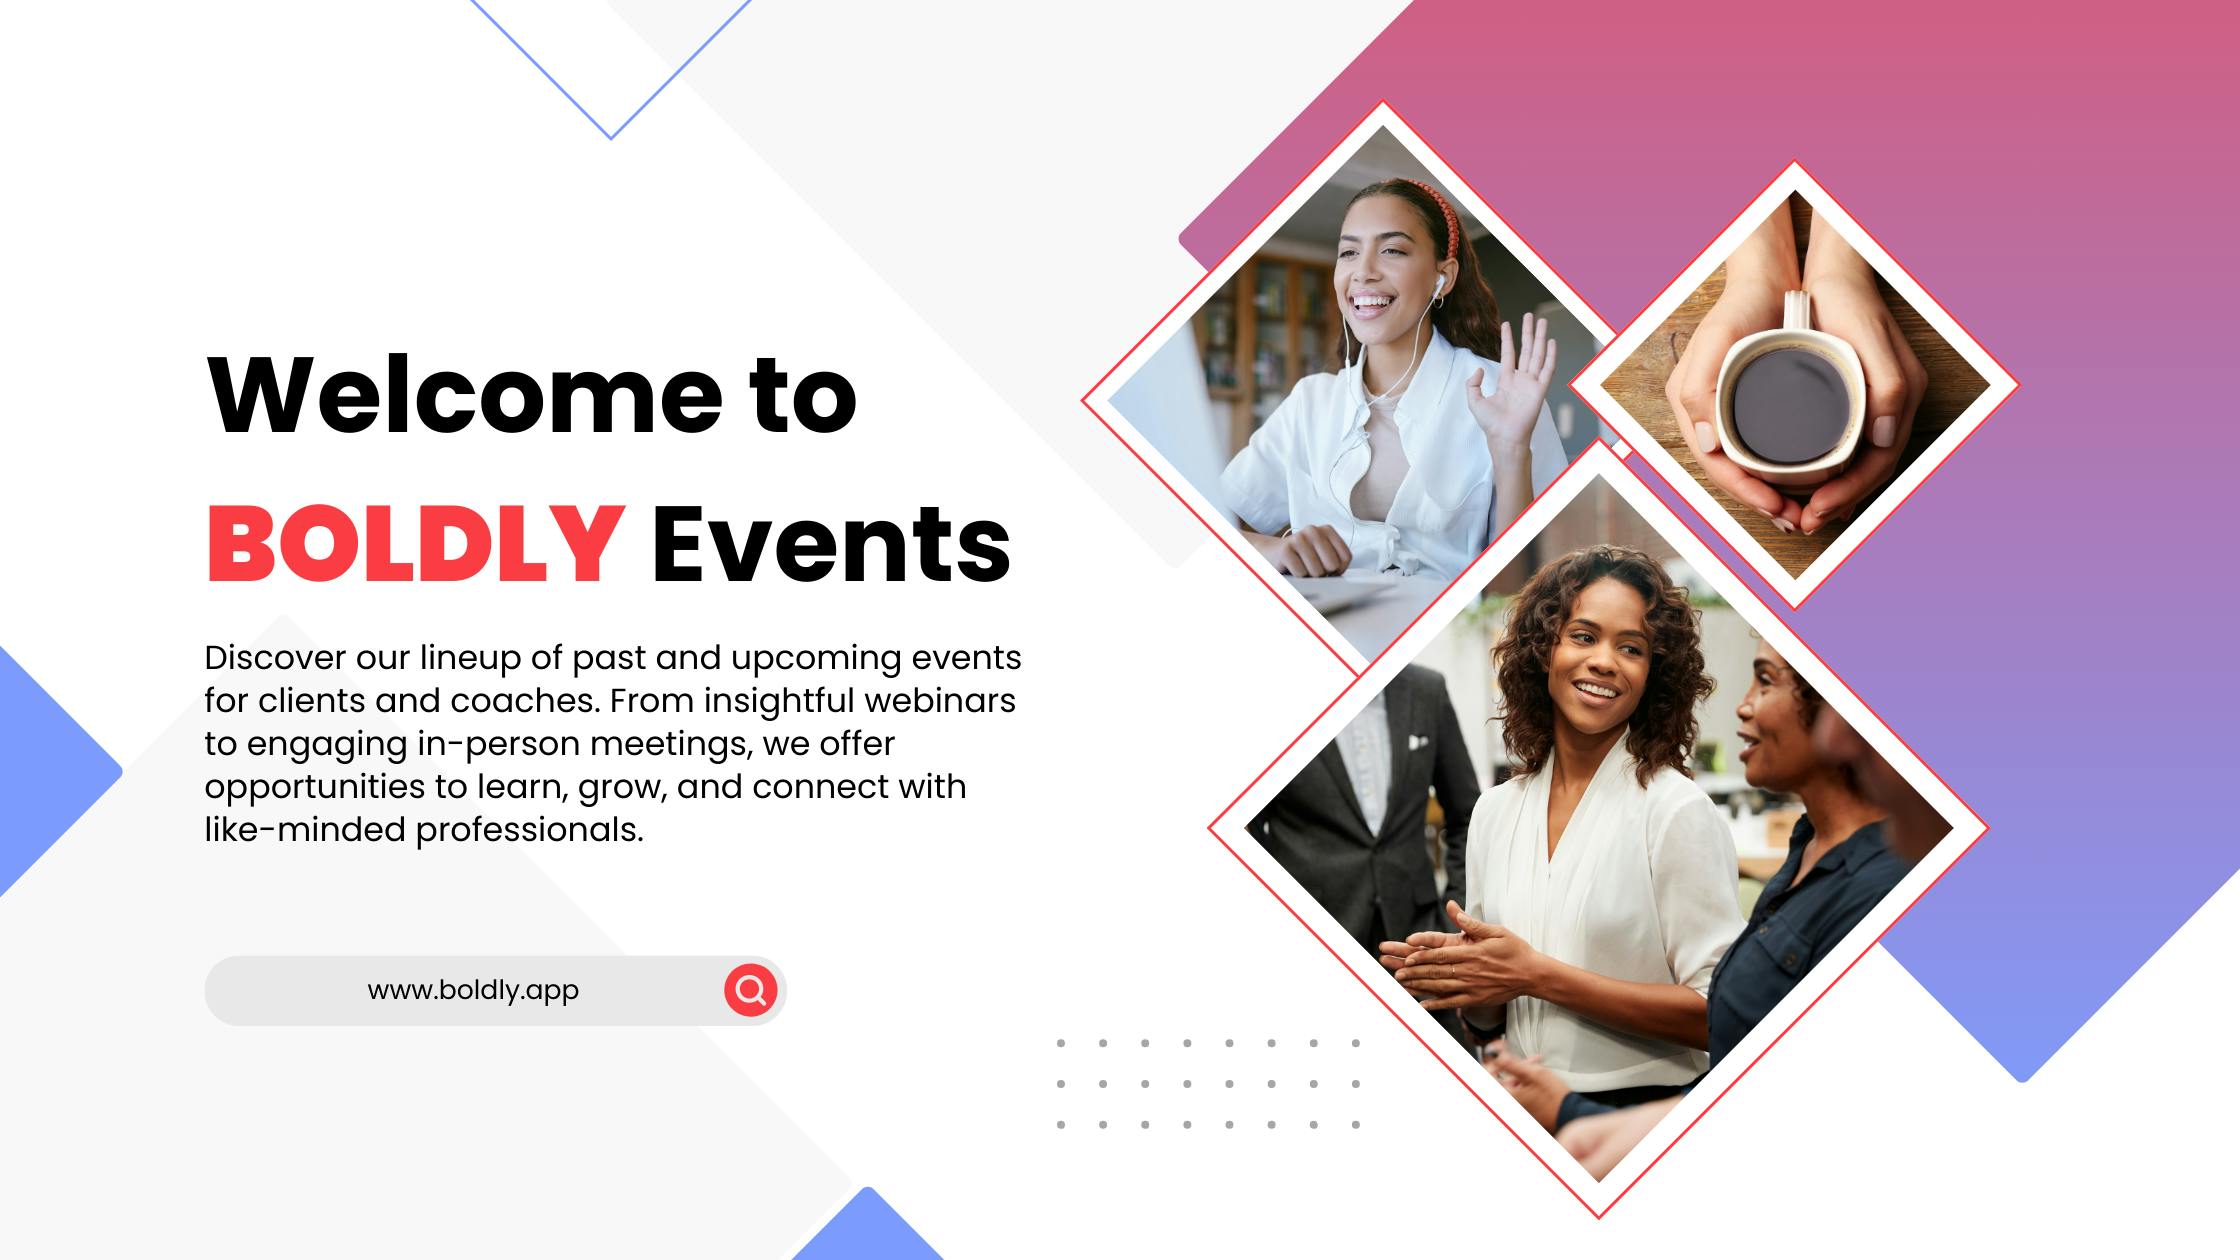 Welcome to BOLDLY Events